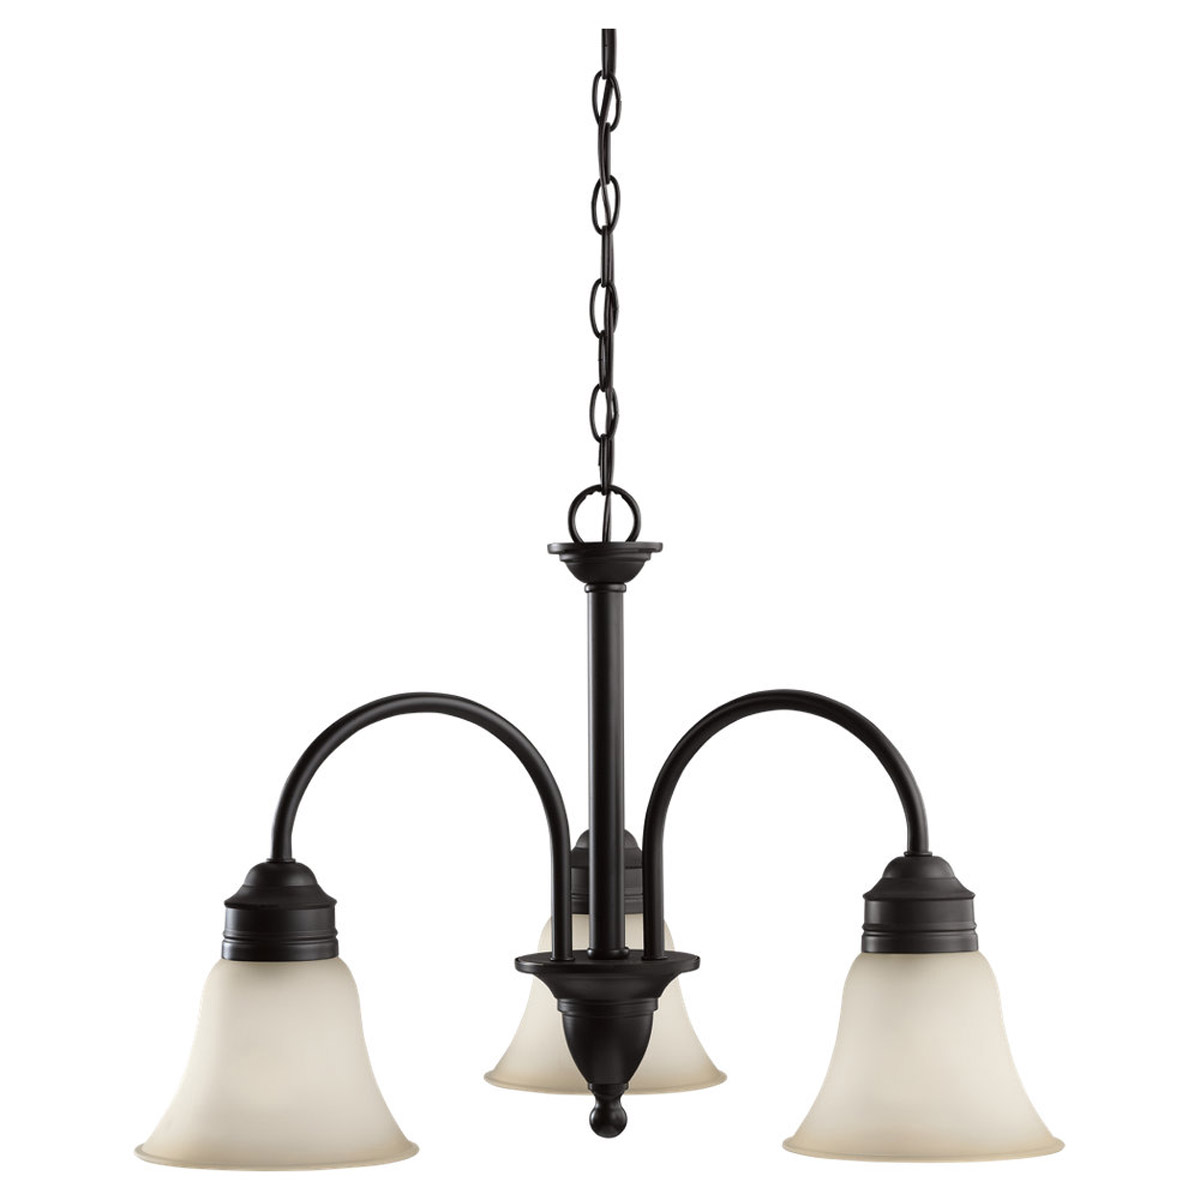 Sea Gull Lighting Gladstone 3 Light Fluorescent Chandelier in Forged Iron 31850BLE-185